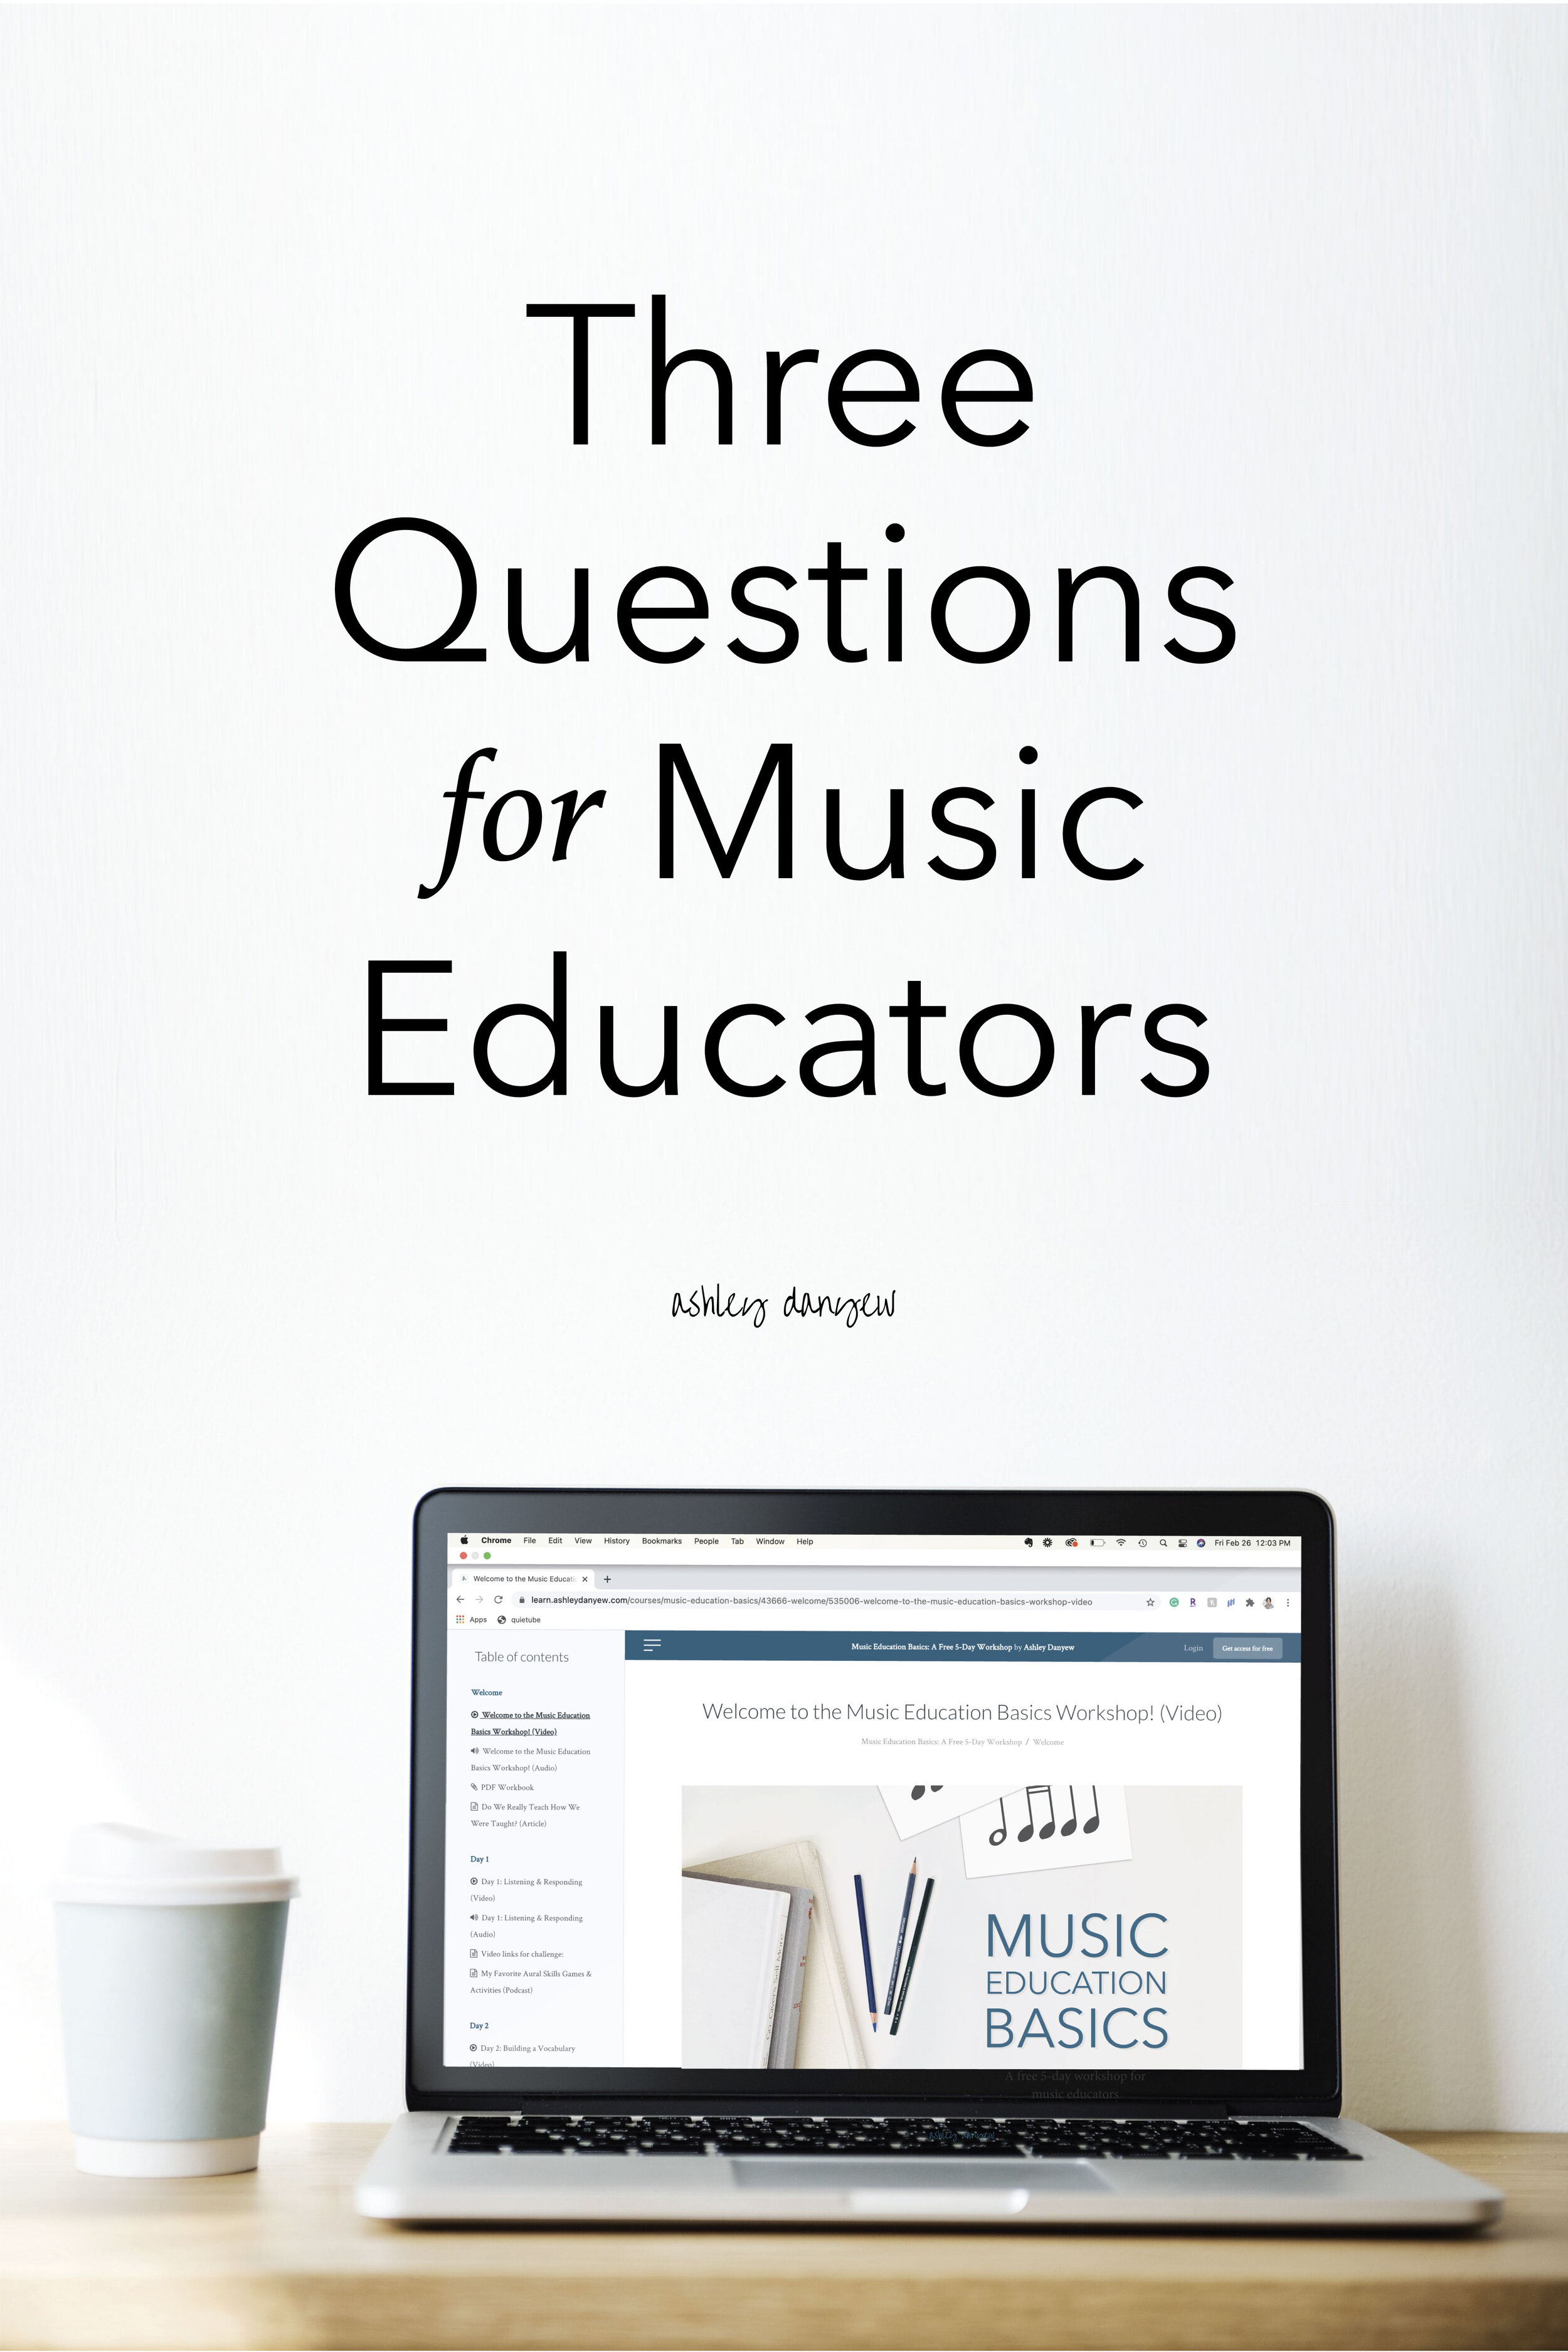 Three Questions for Music Educators